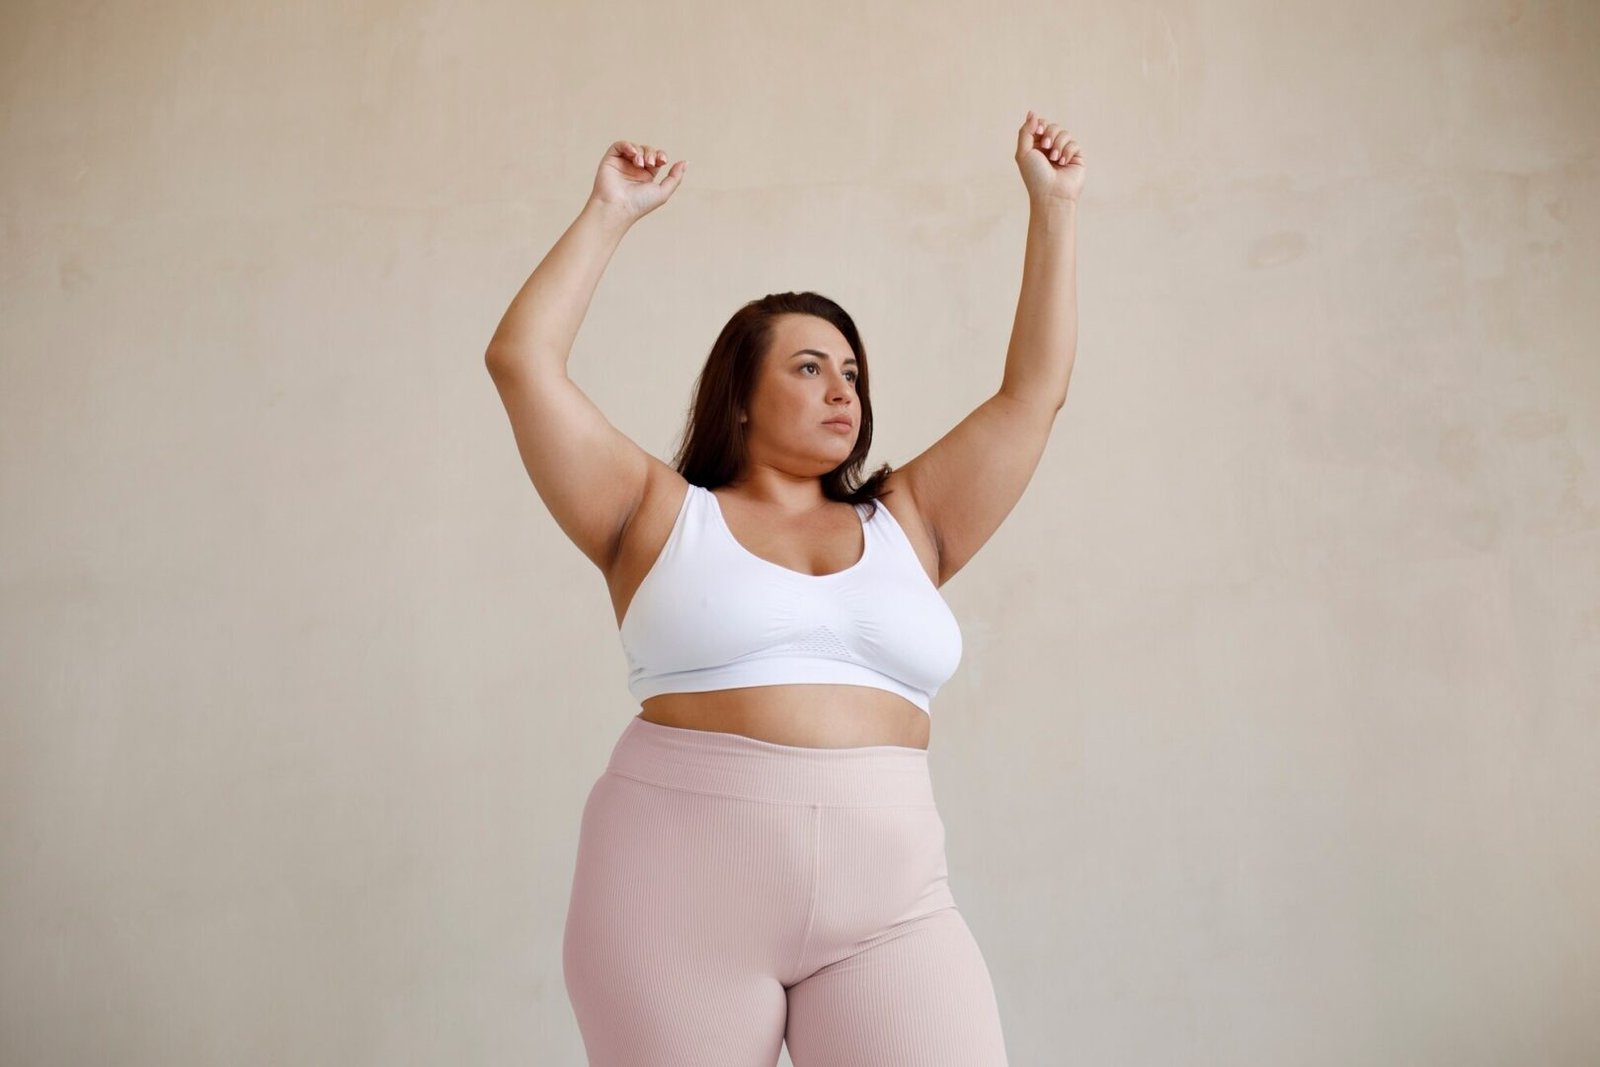 An obese young woman poses in workout clothes